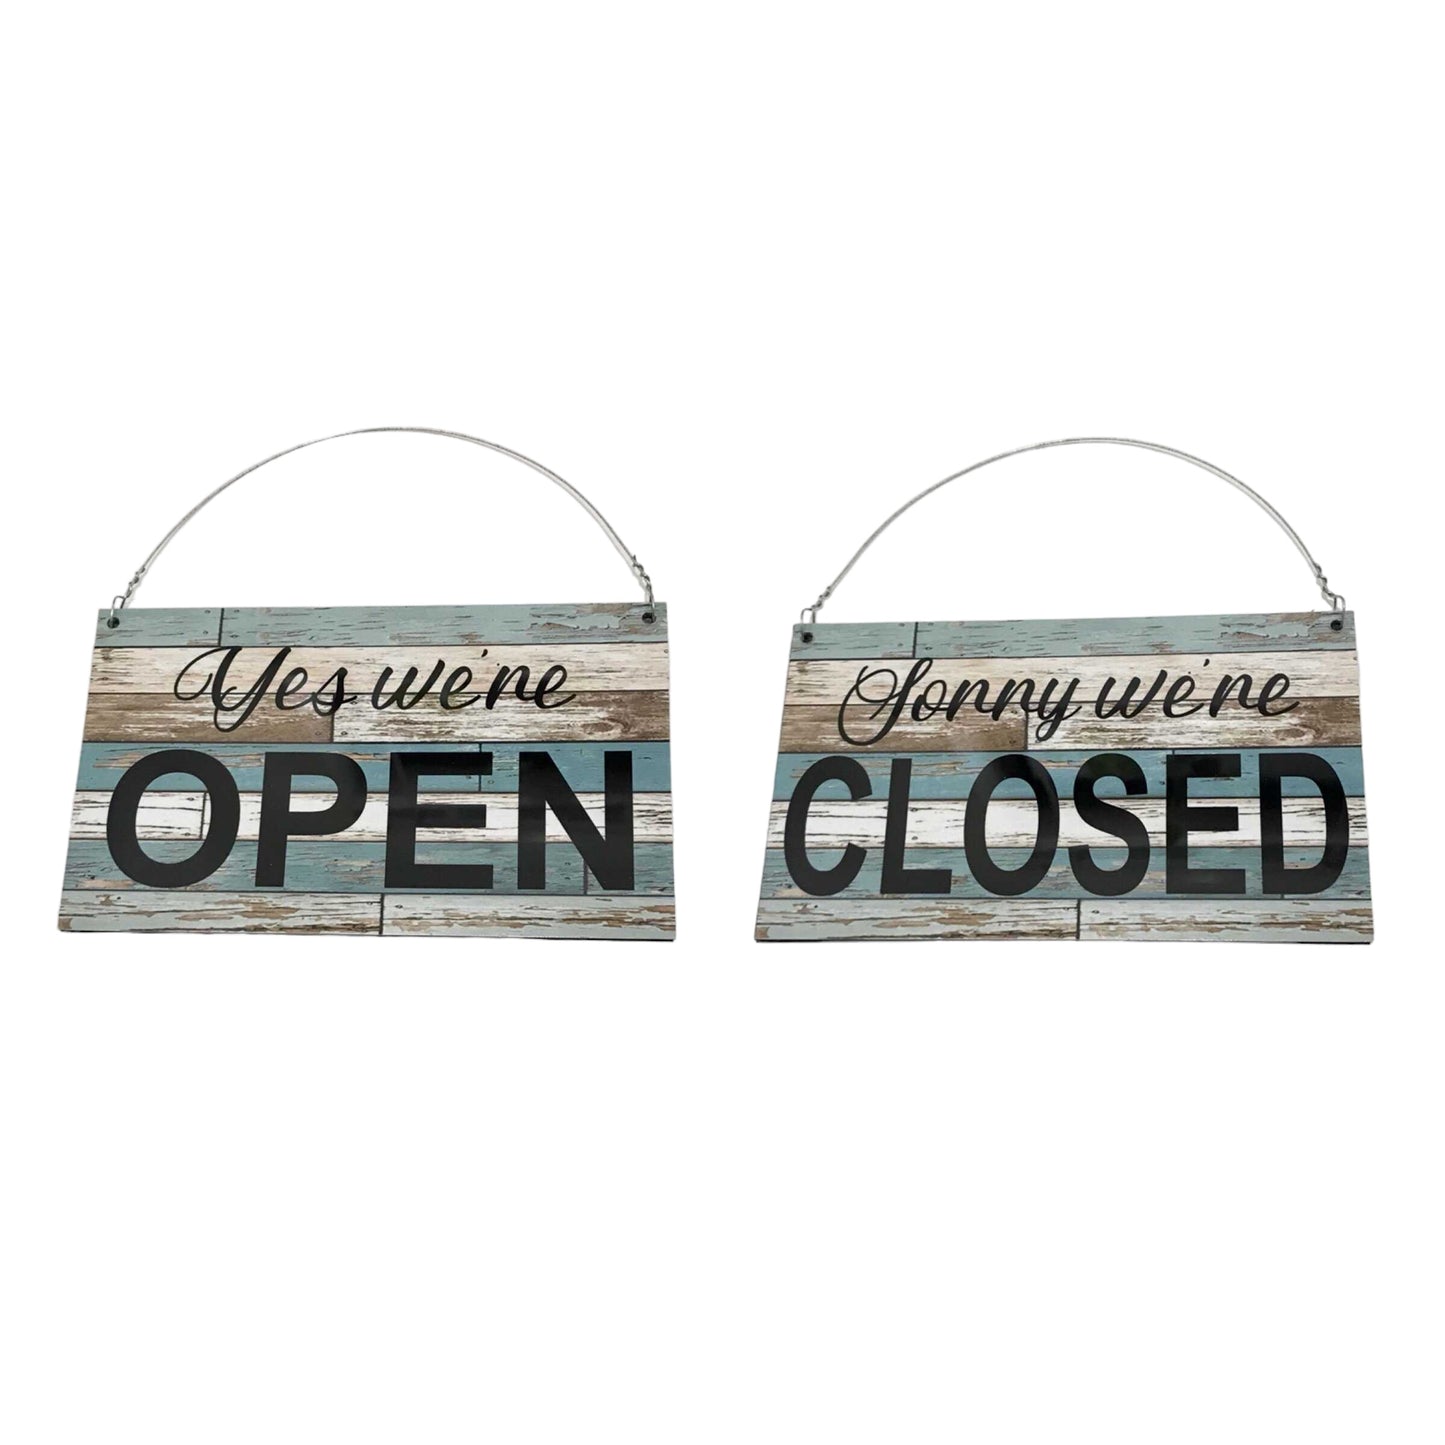 Open Closed Business Shop Café Hanging Sign - Blue Timber Look - The Renmy Store Homewares & Gifts 